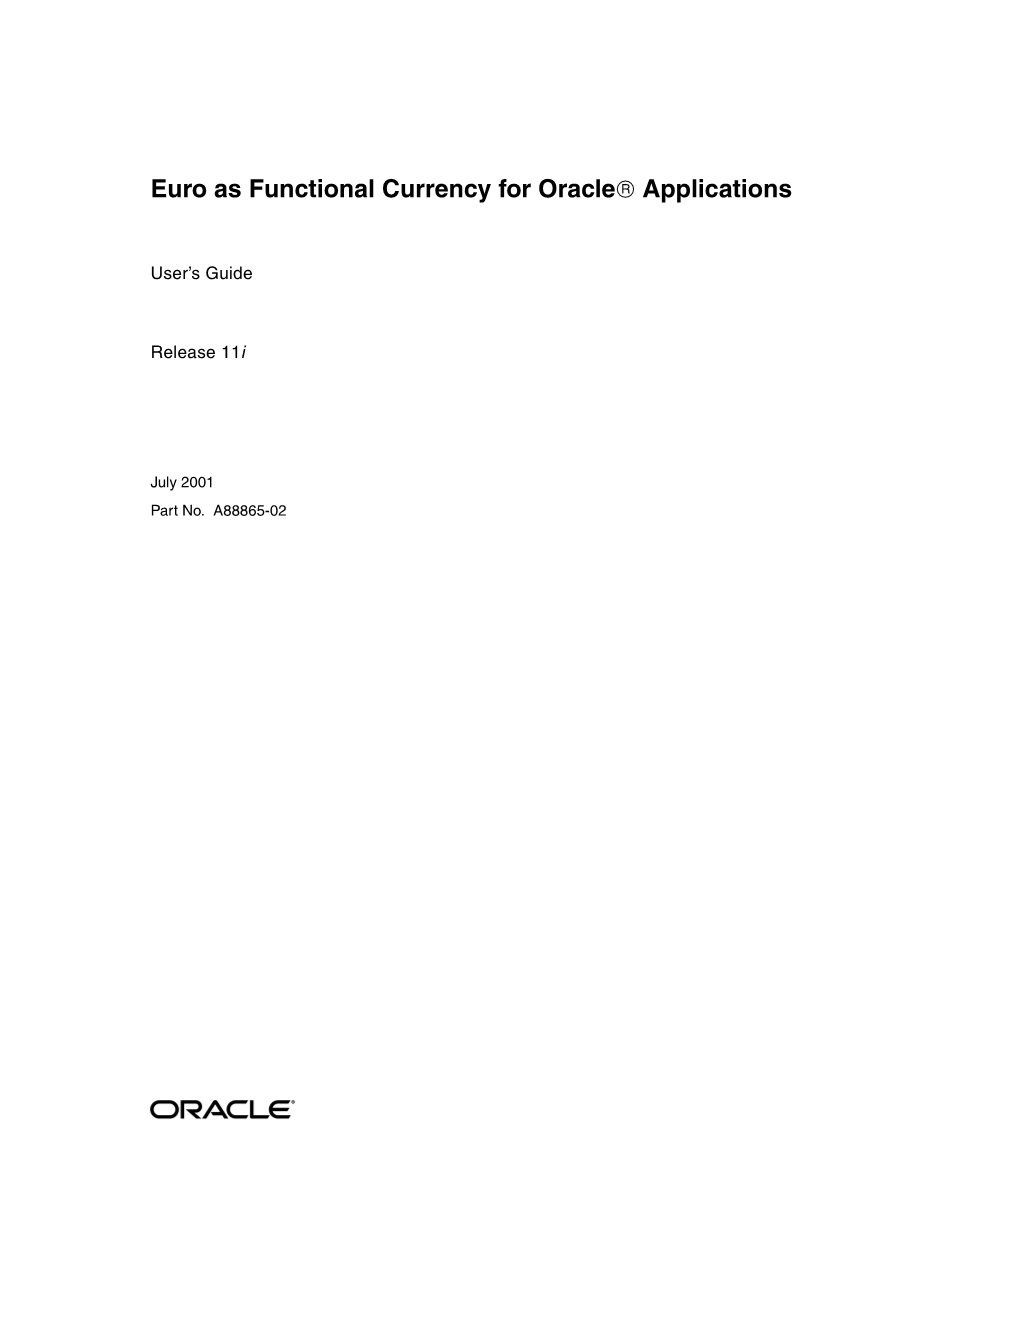 Euro As Functional Currency for Oracle Applications User's Guide, Release 11I